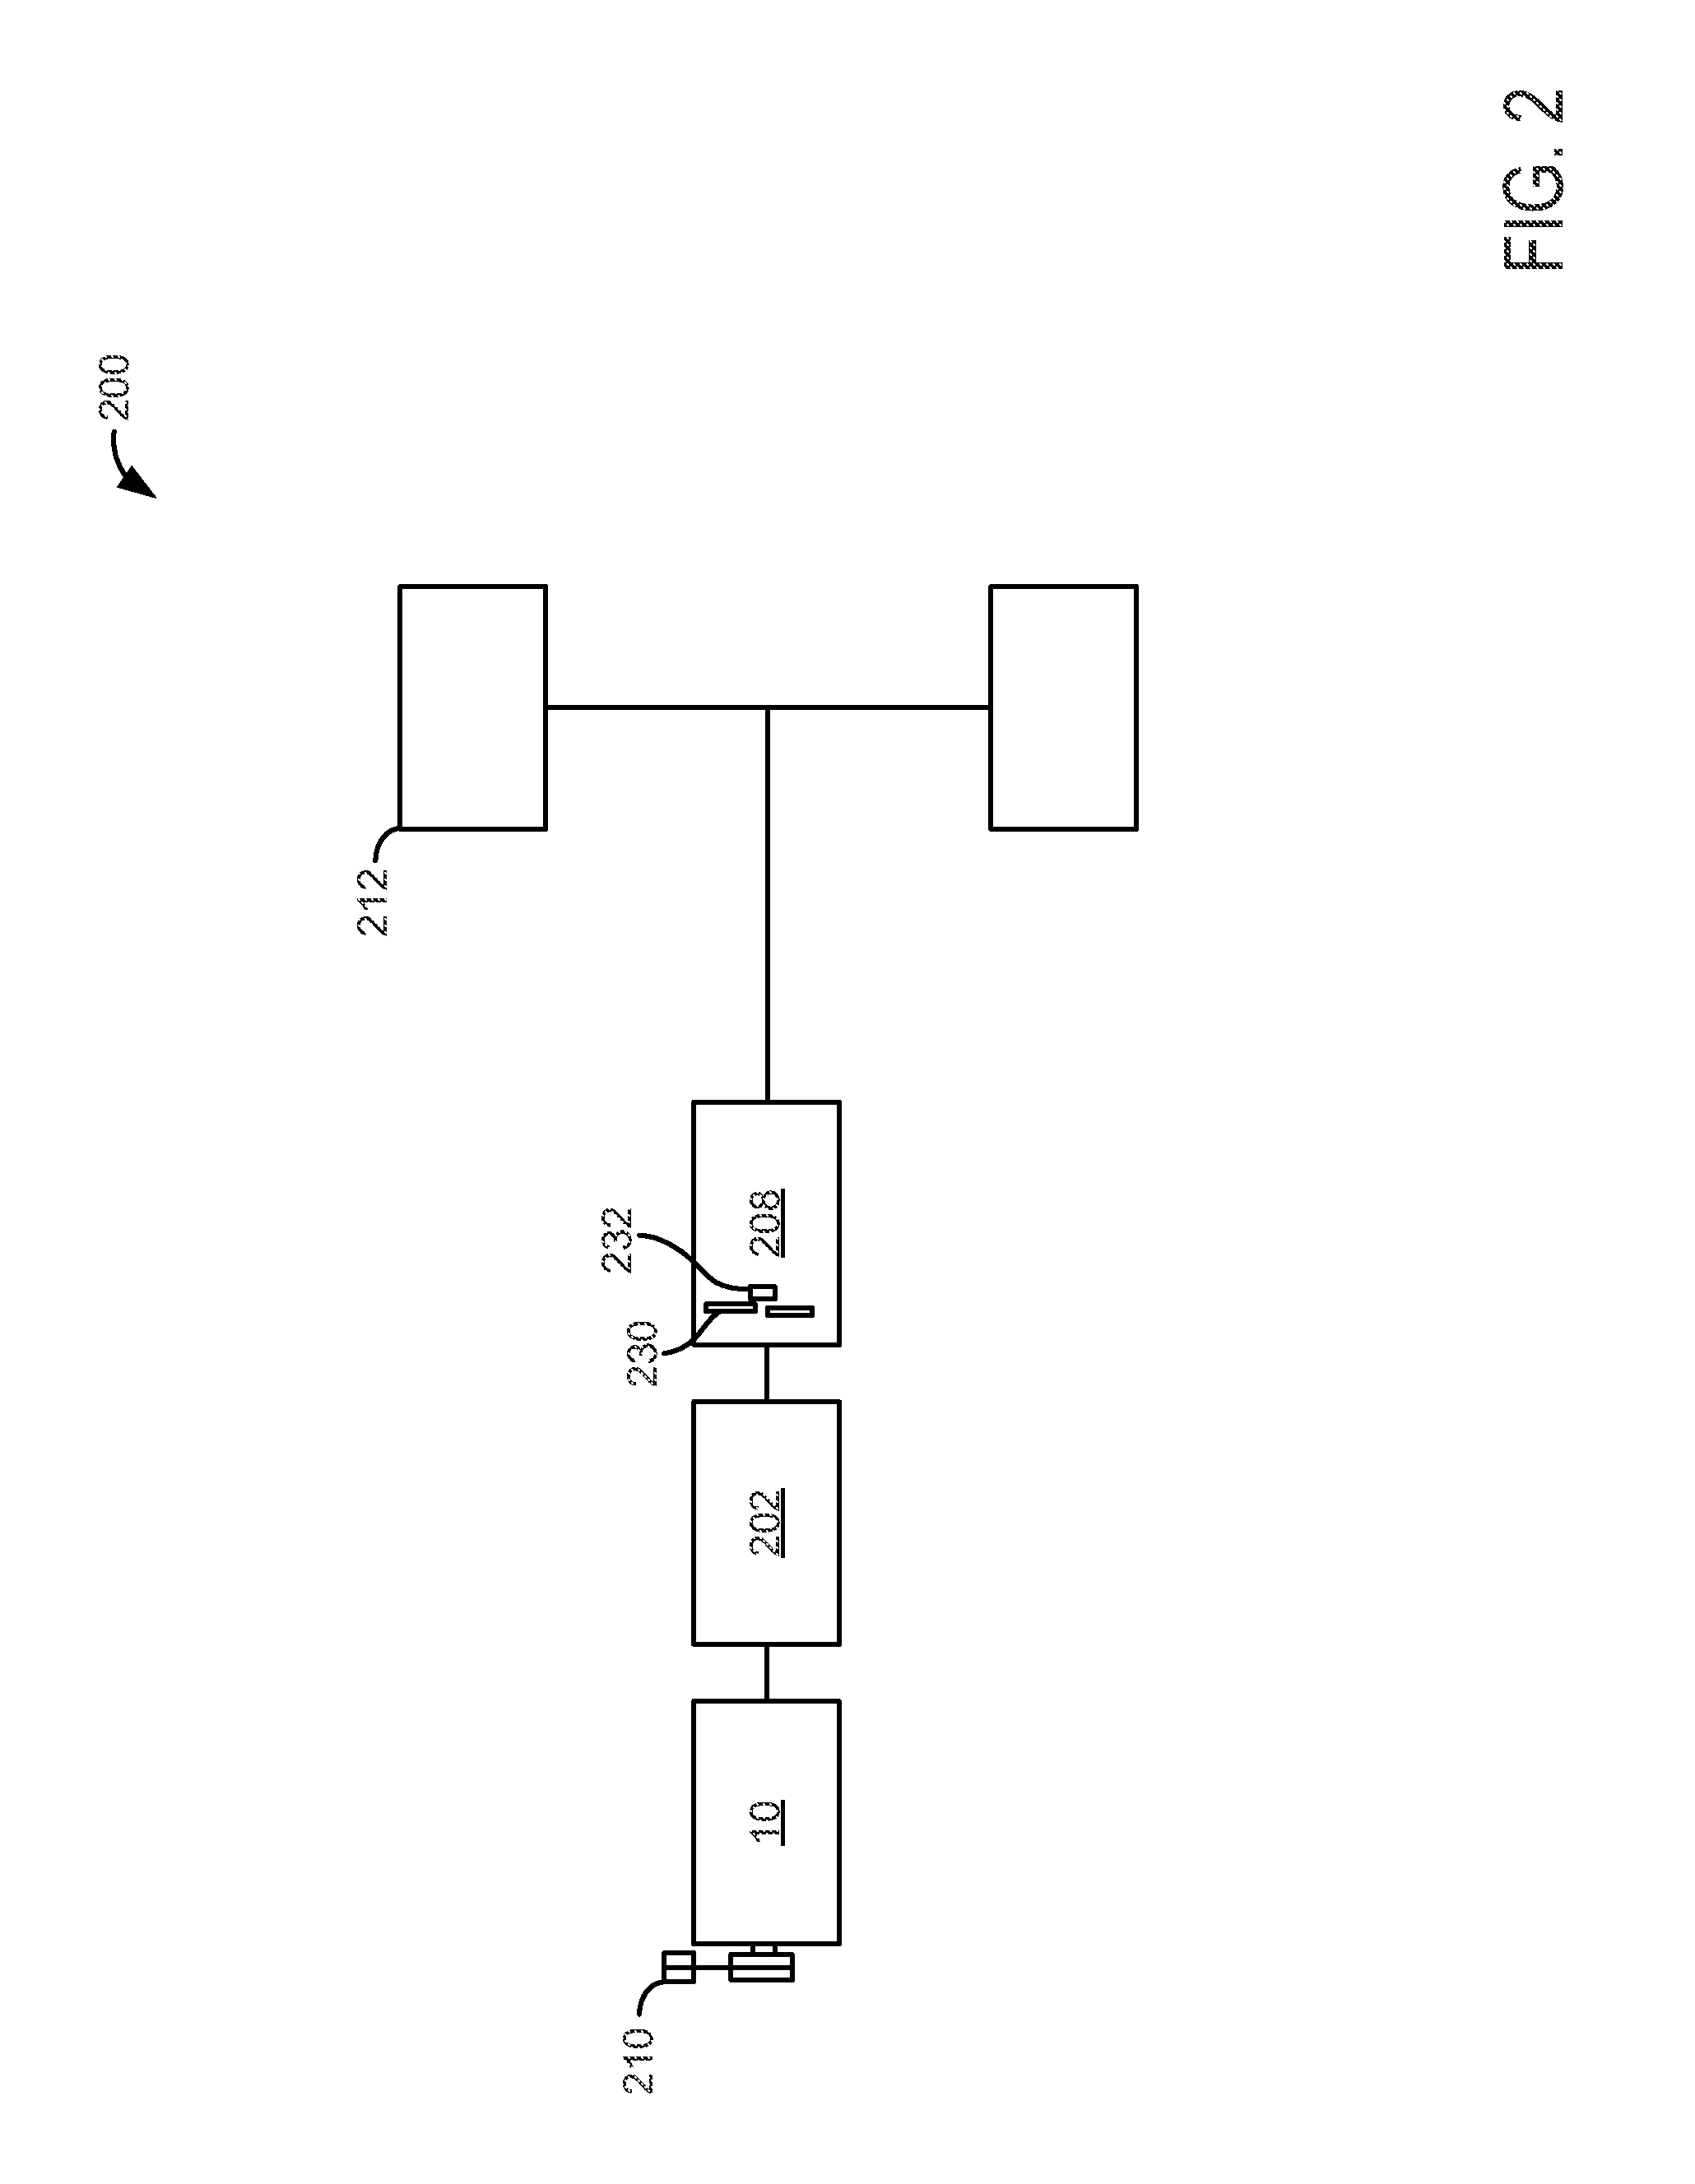 System and method for monitoring an ignition system